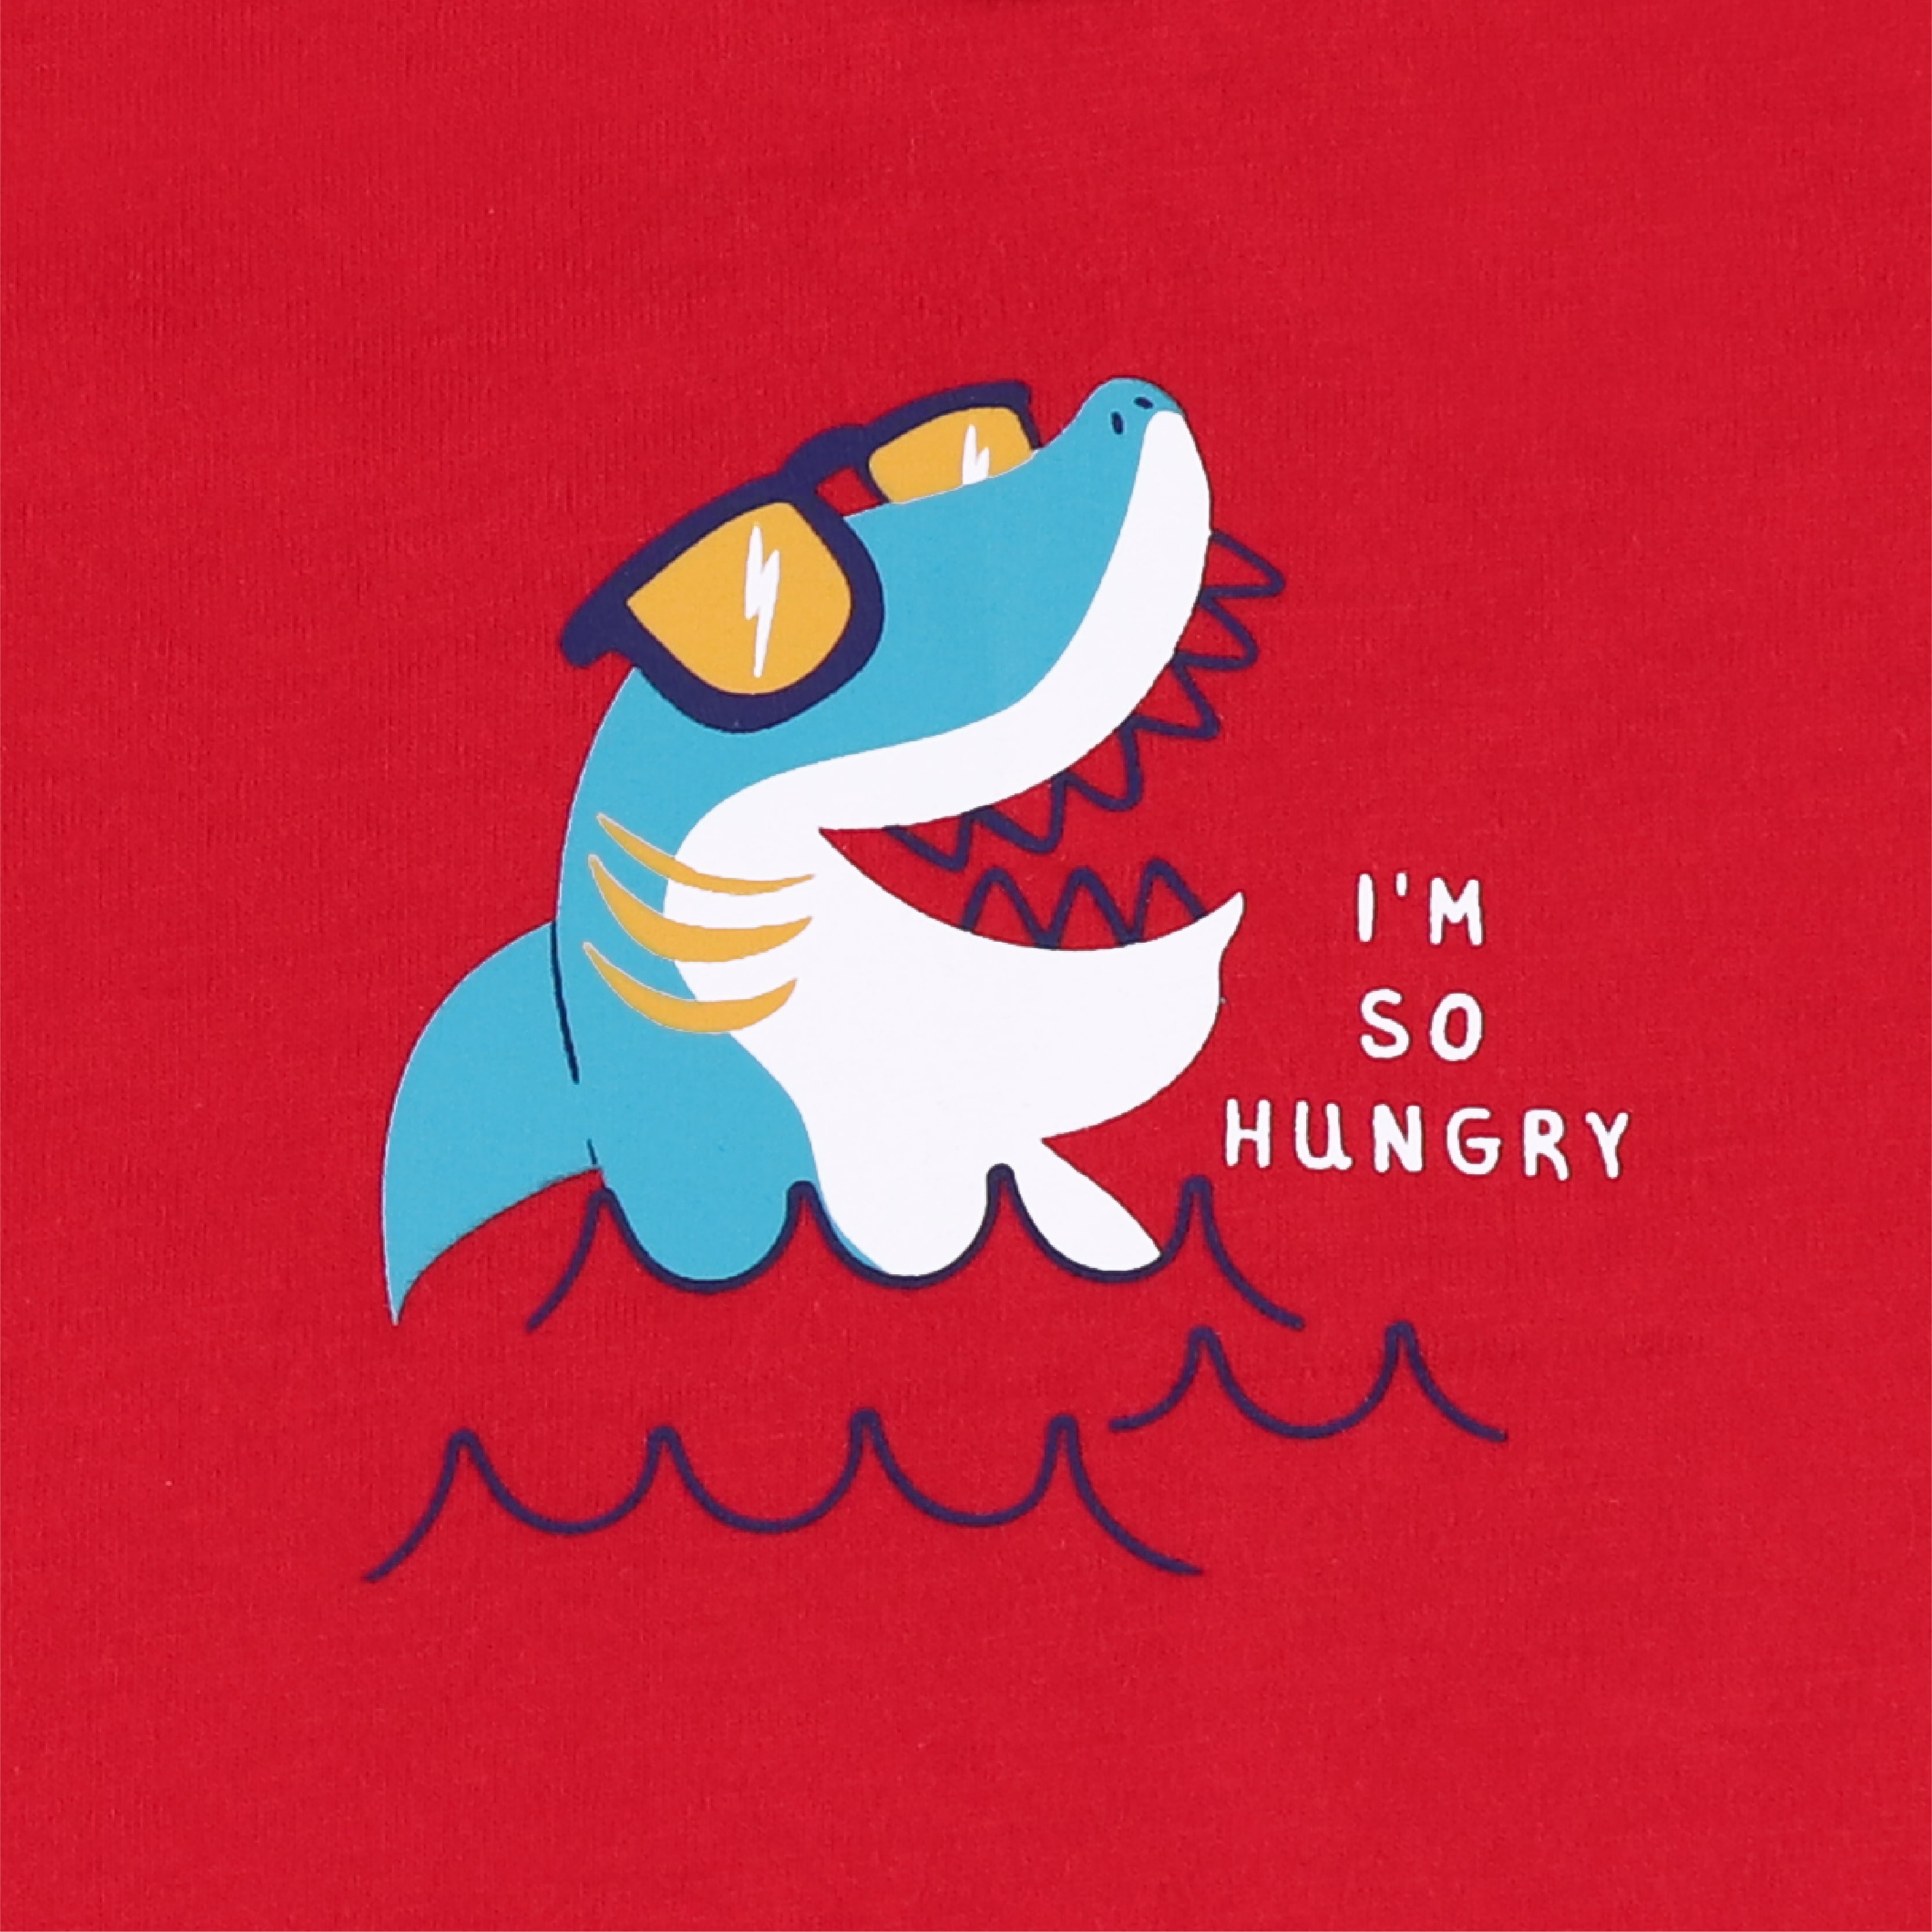 FIFFY HUNGRY SHARK T-SHIRT SUIT